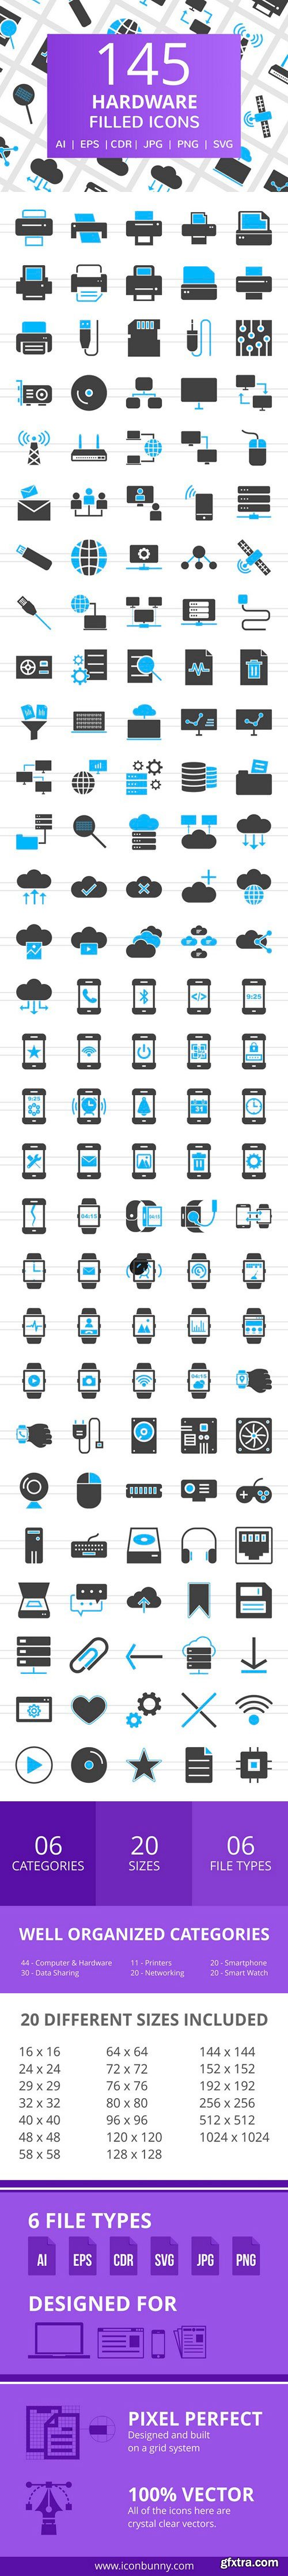 CM - 145 Hardware Filled Icons 2517453